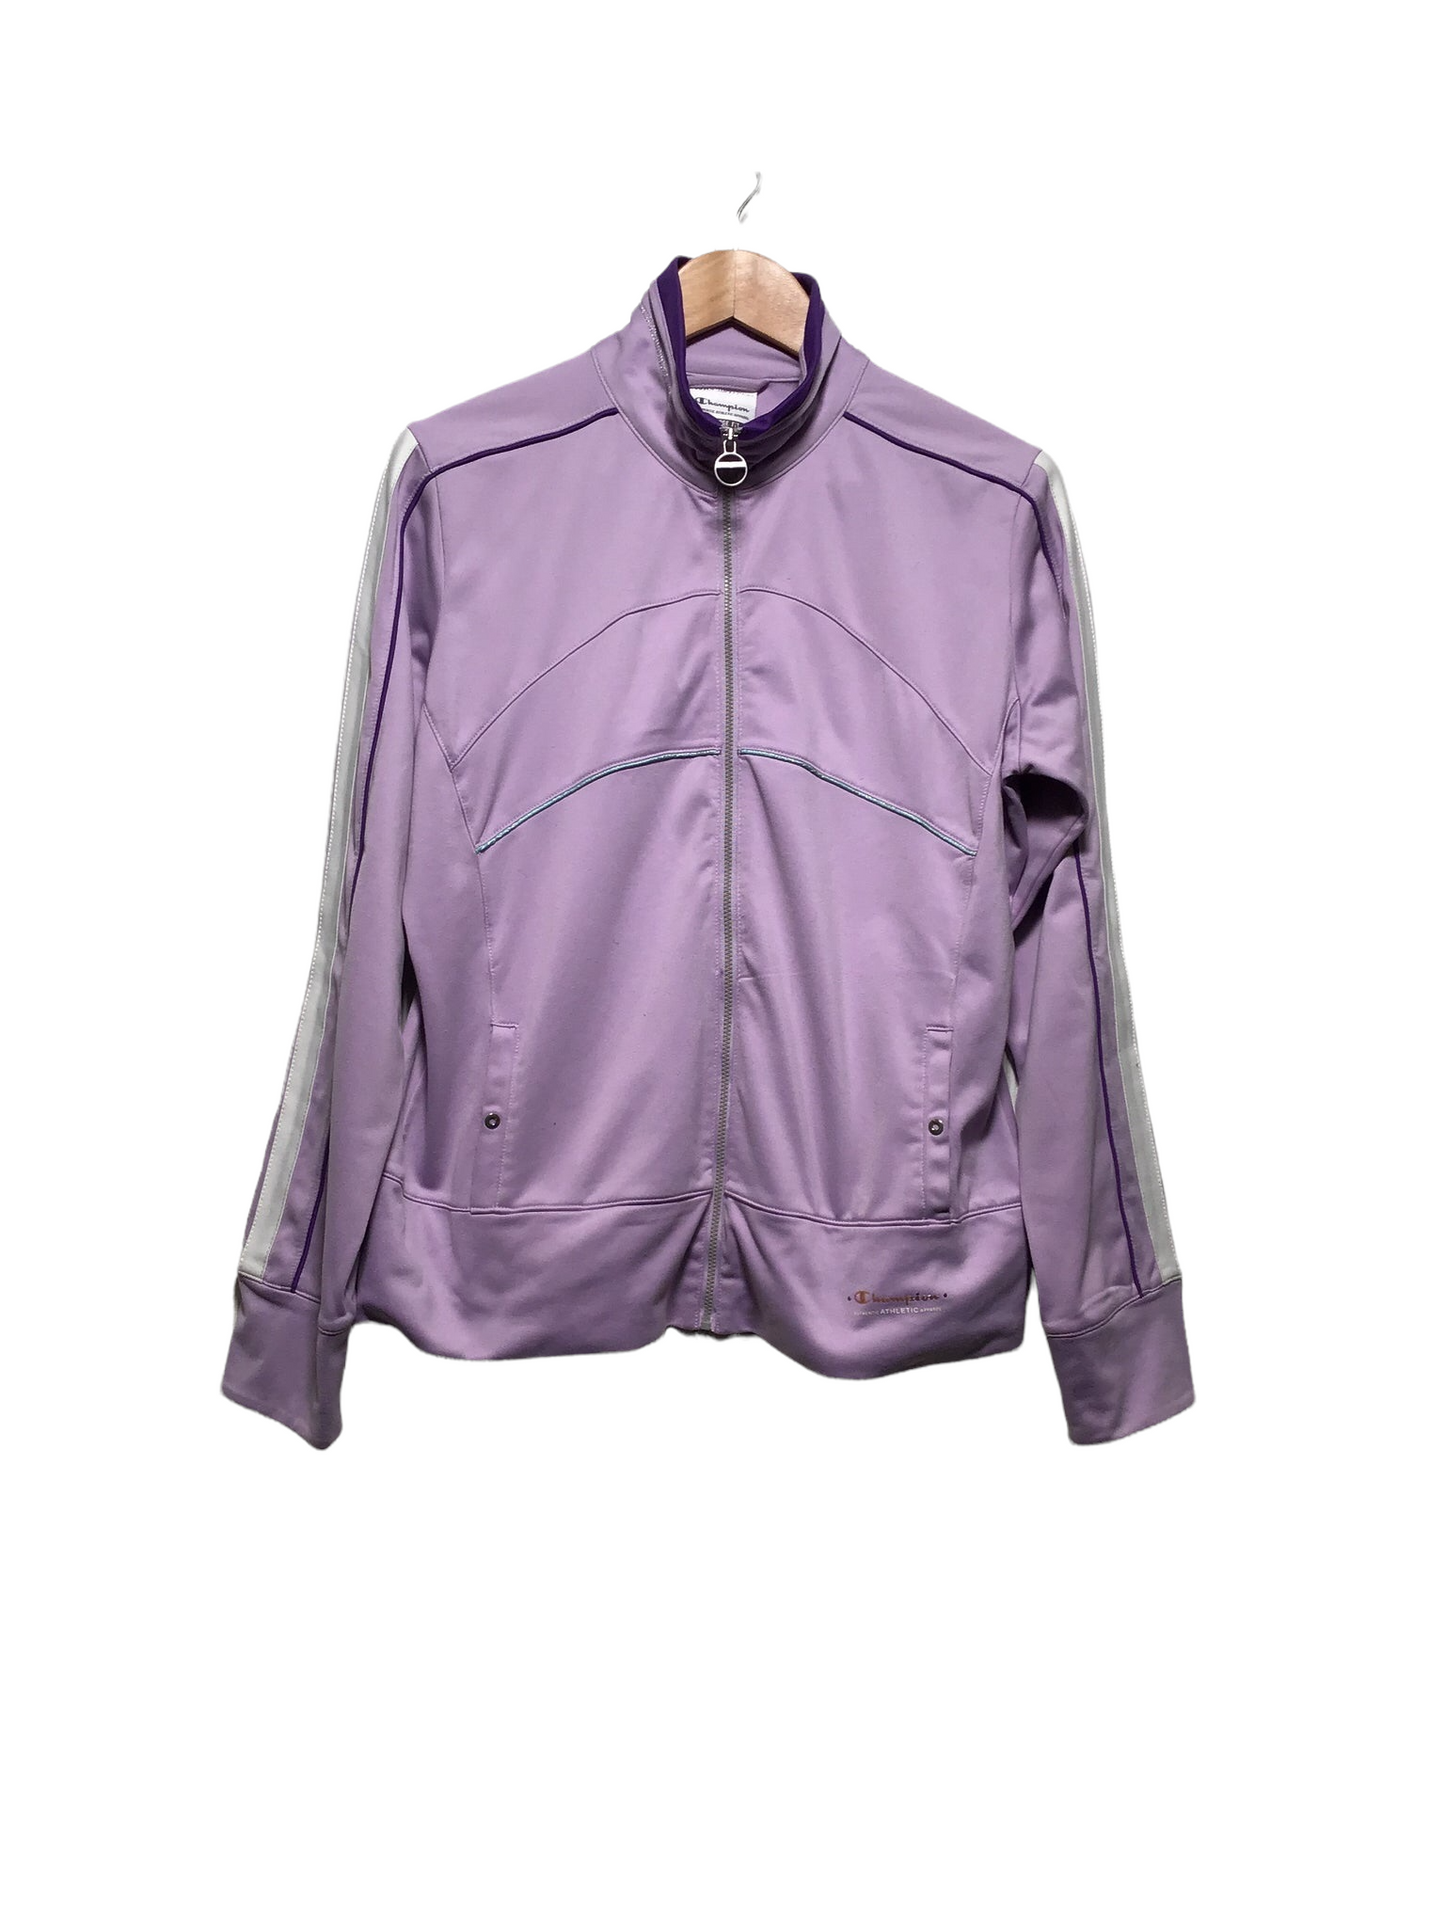 Champion Heritage Fit Track Top (Women's Size L)